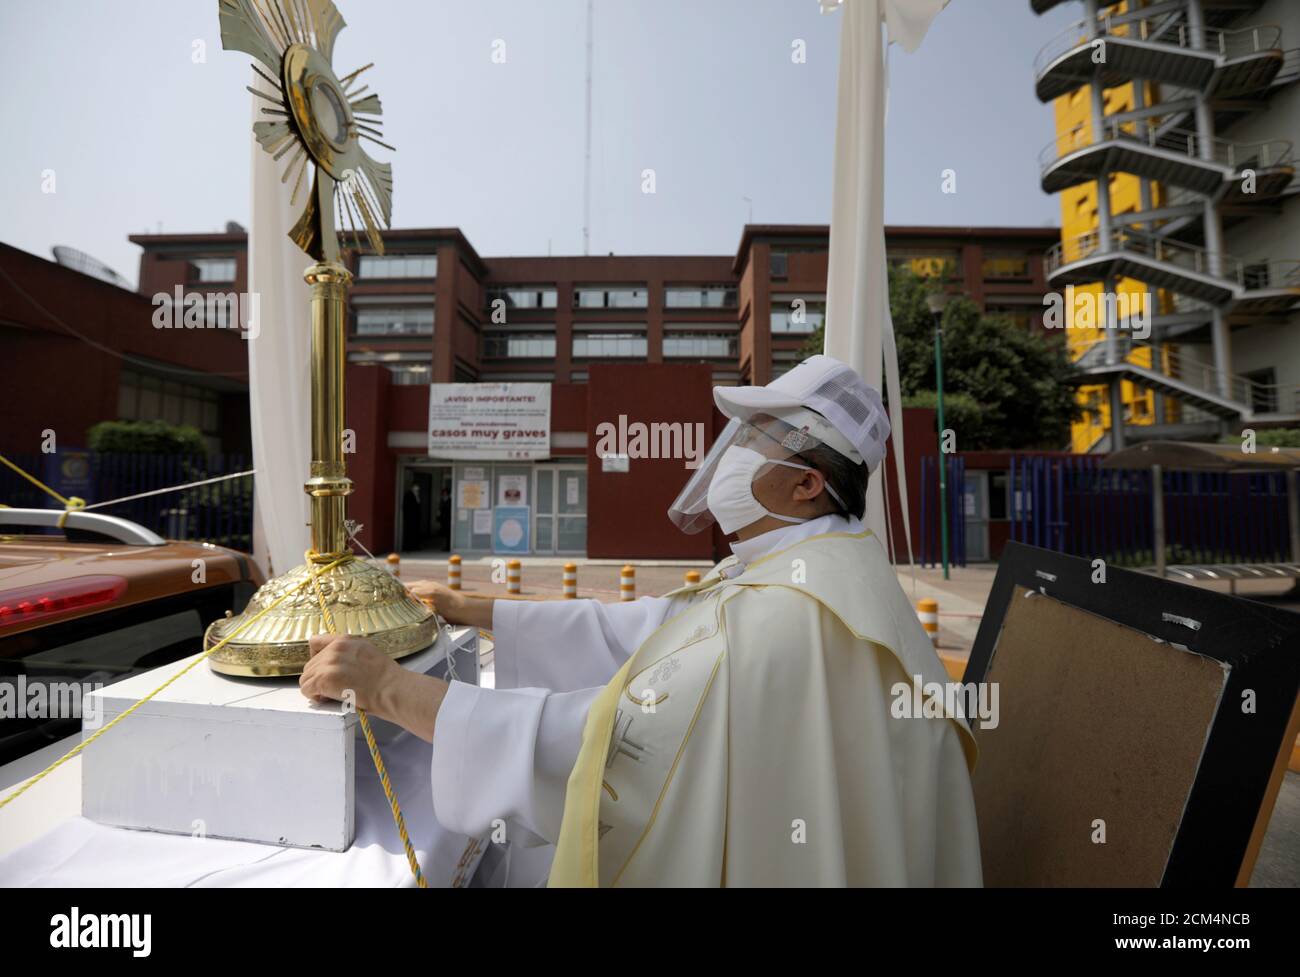 Angel Lauro Sanchez, the parish priest of the Catholic Church of the Lady of the Rosary, performs a procession in the streets with the image of the Sacrament Jesus to pray for soon dissipation of the current situation coronavirus disease (COVID 19) pandemic, in Mexico City, Mexico April 19, 2020. REUTERS/Luis Cortes Stock Photo